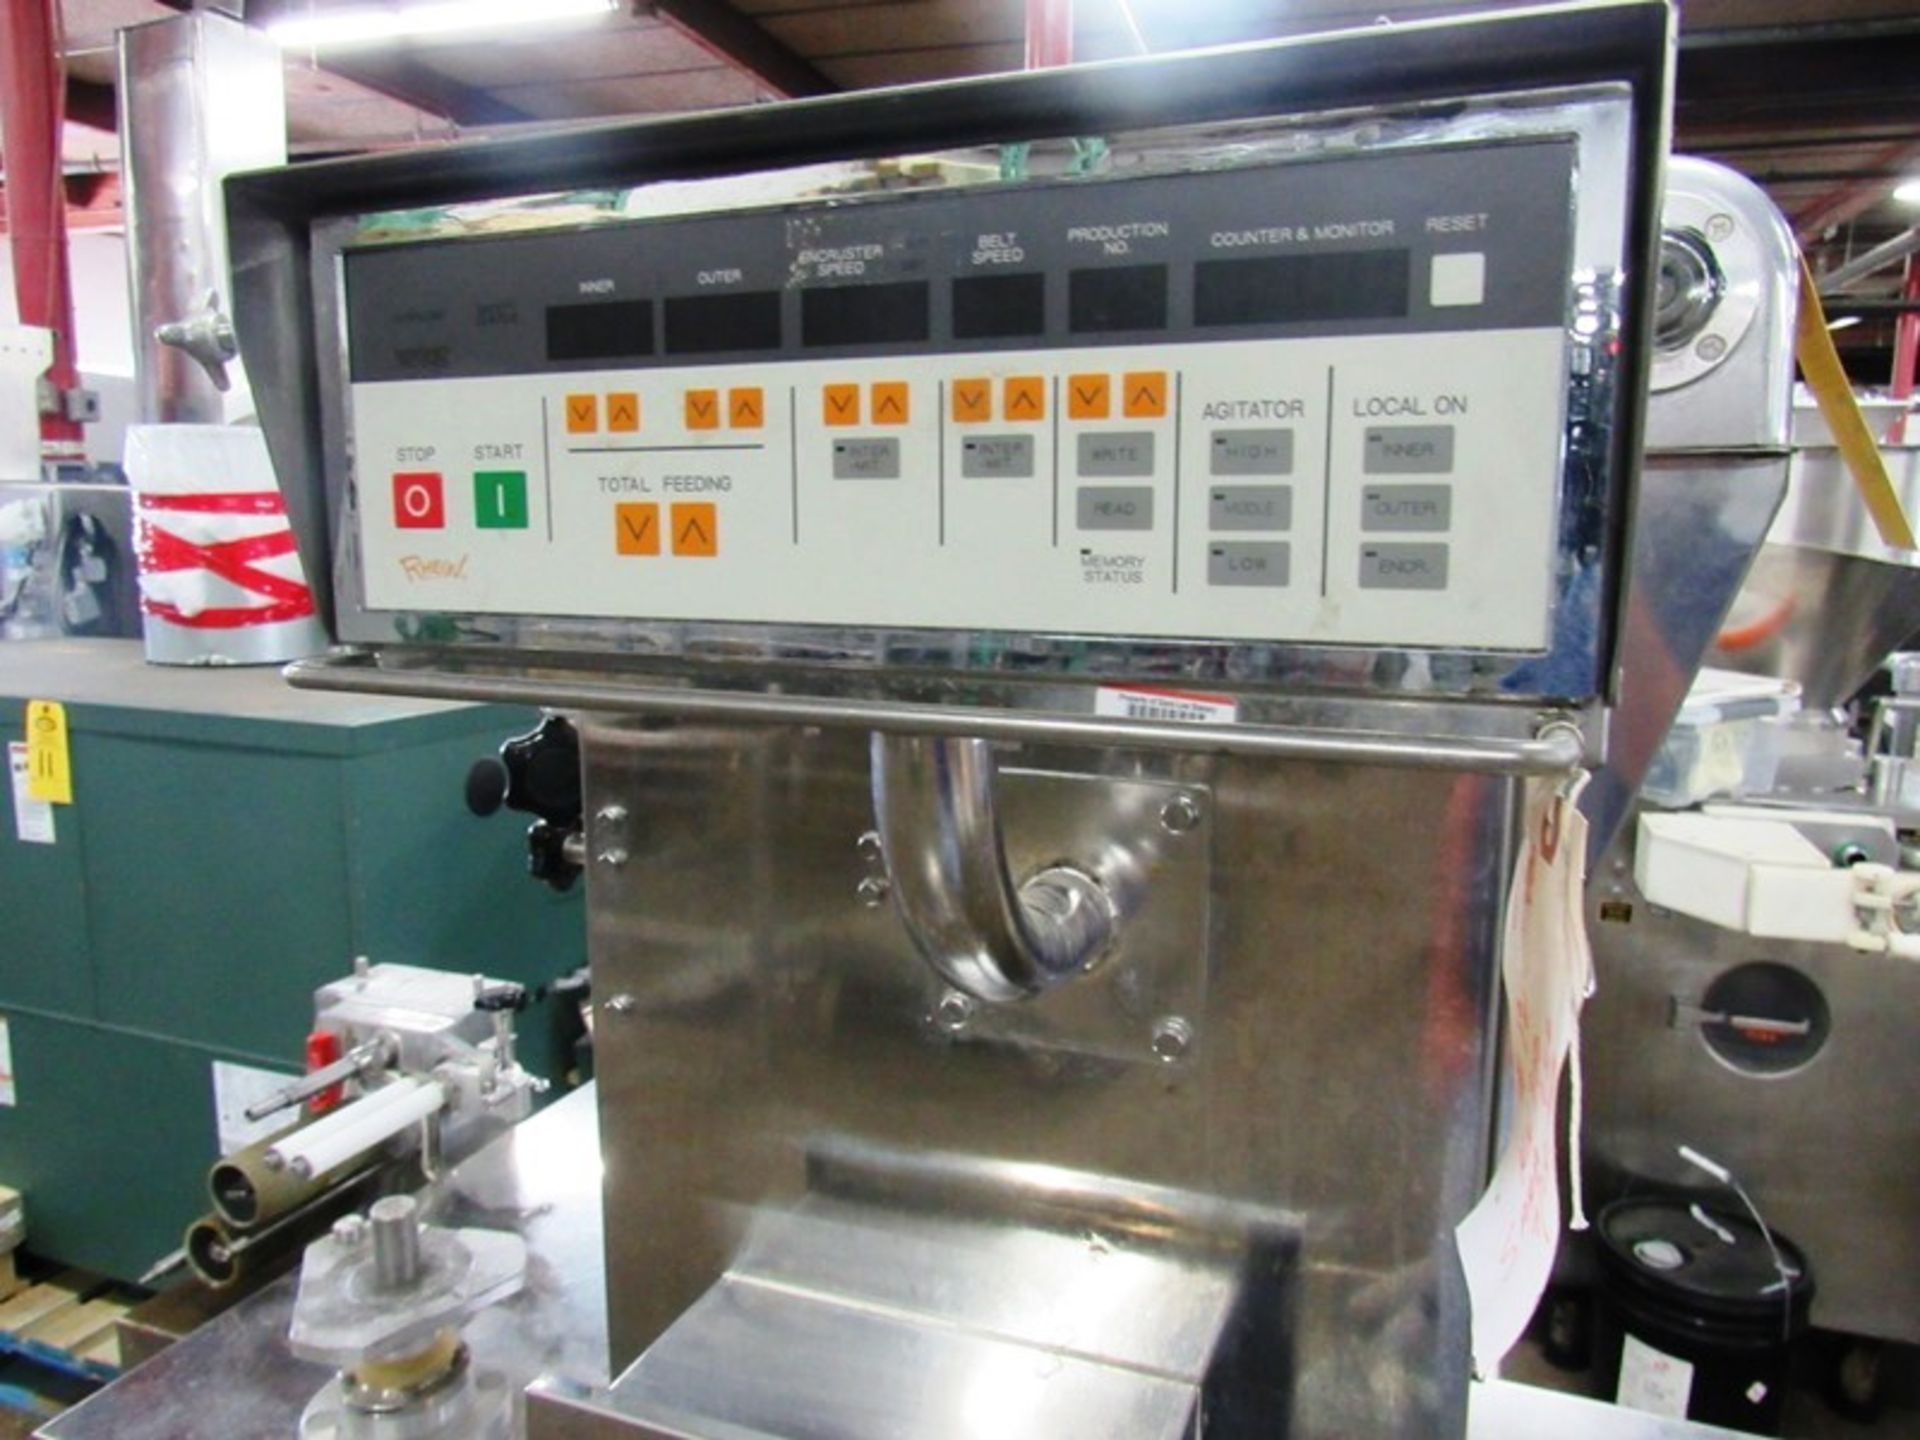 Rheon Mdl. KN300 Cornucopia Encrusting Machine, 220 volts, 3 phase - ***All Monies must be received - Image 4 of 7